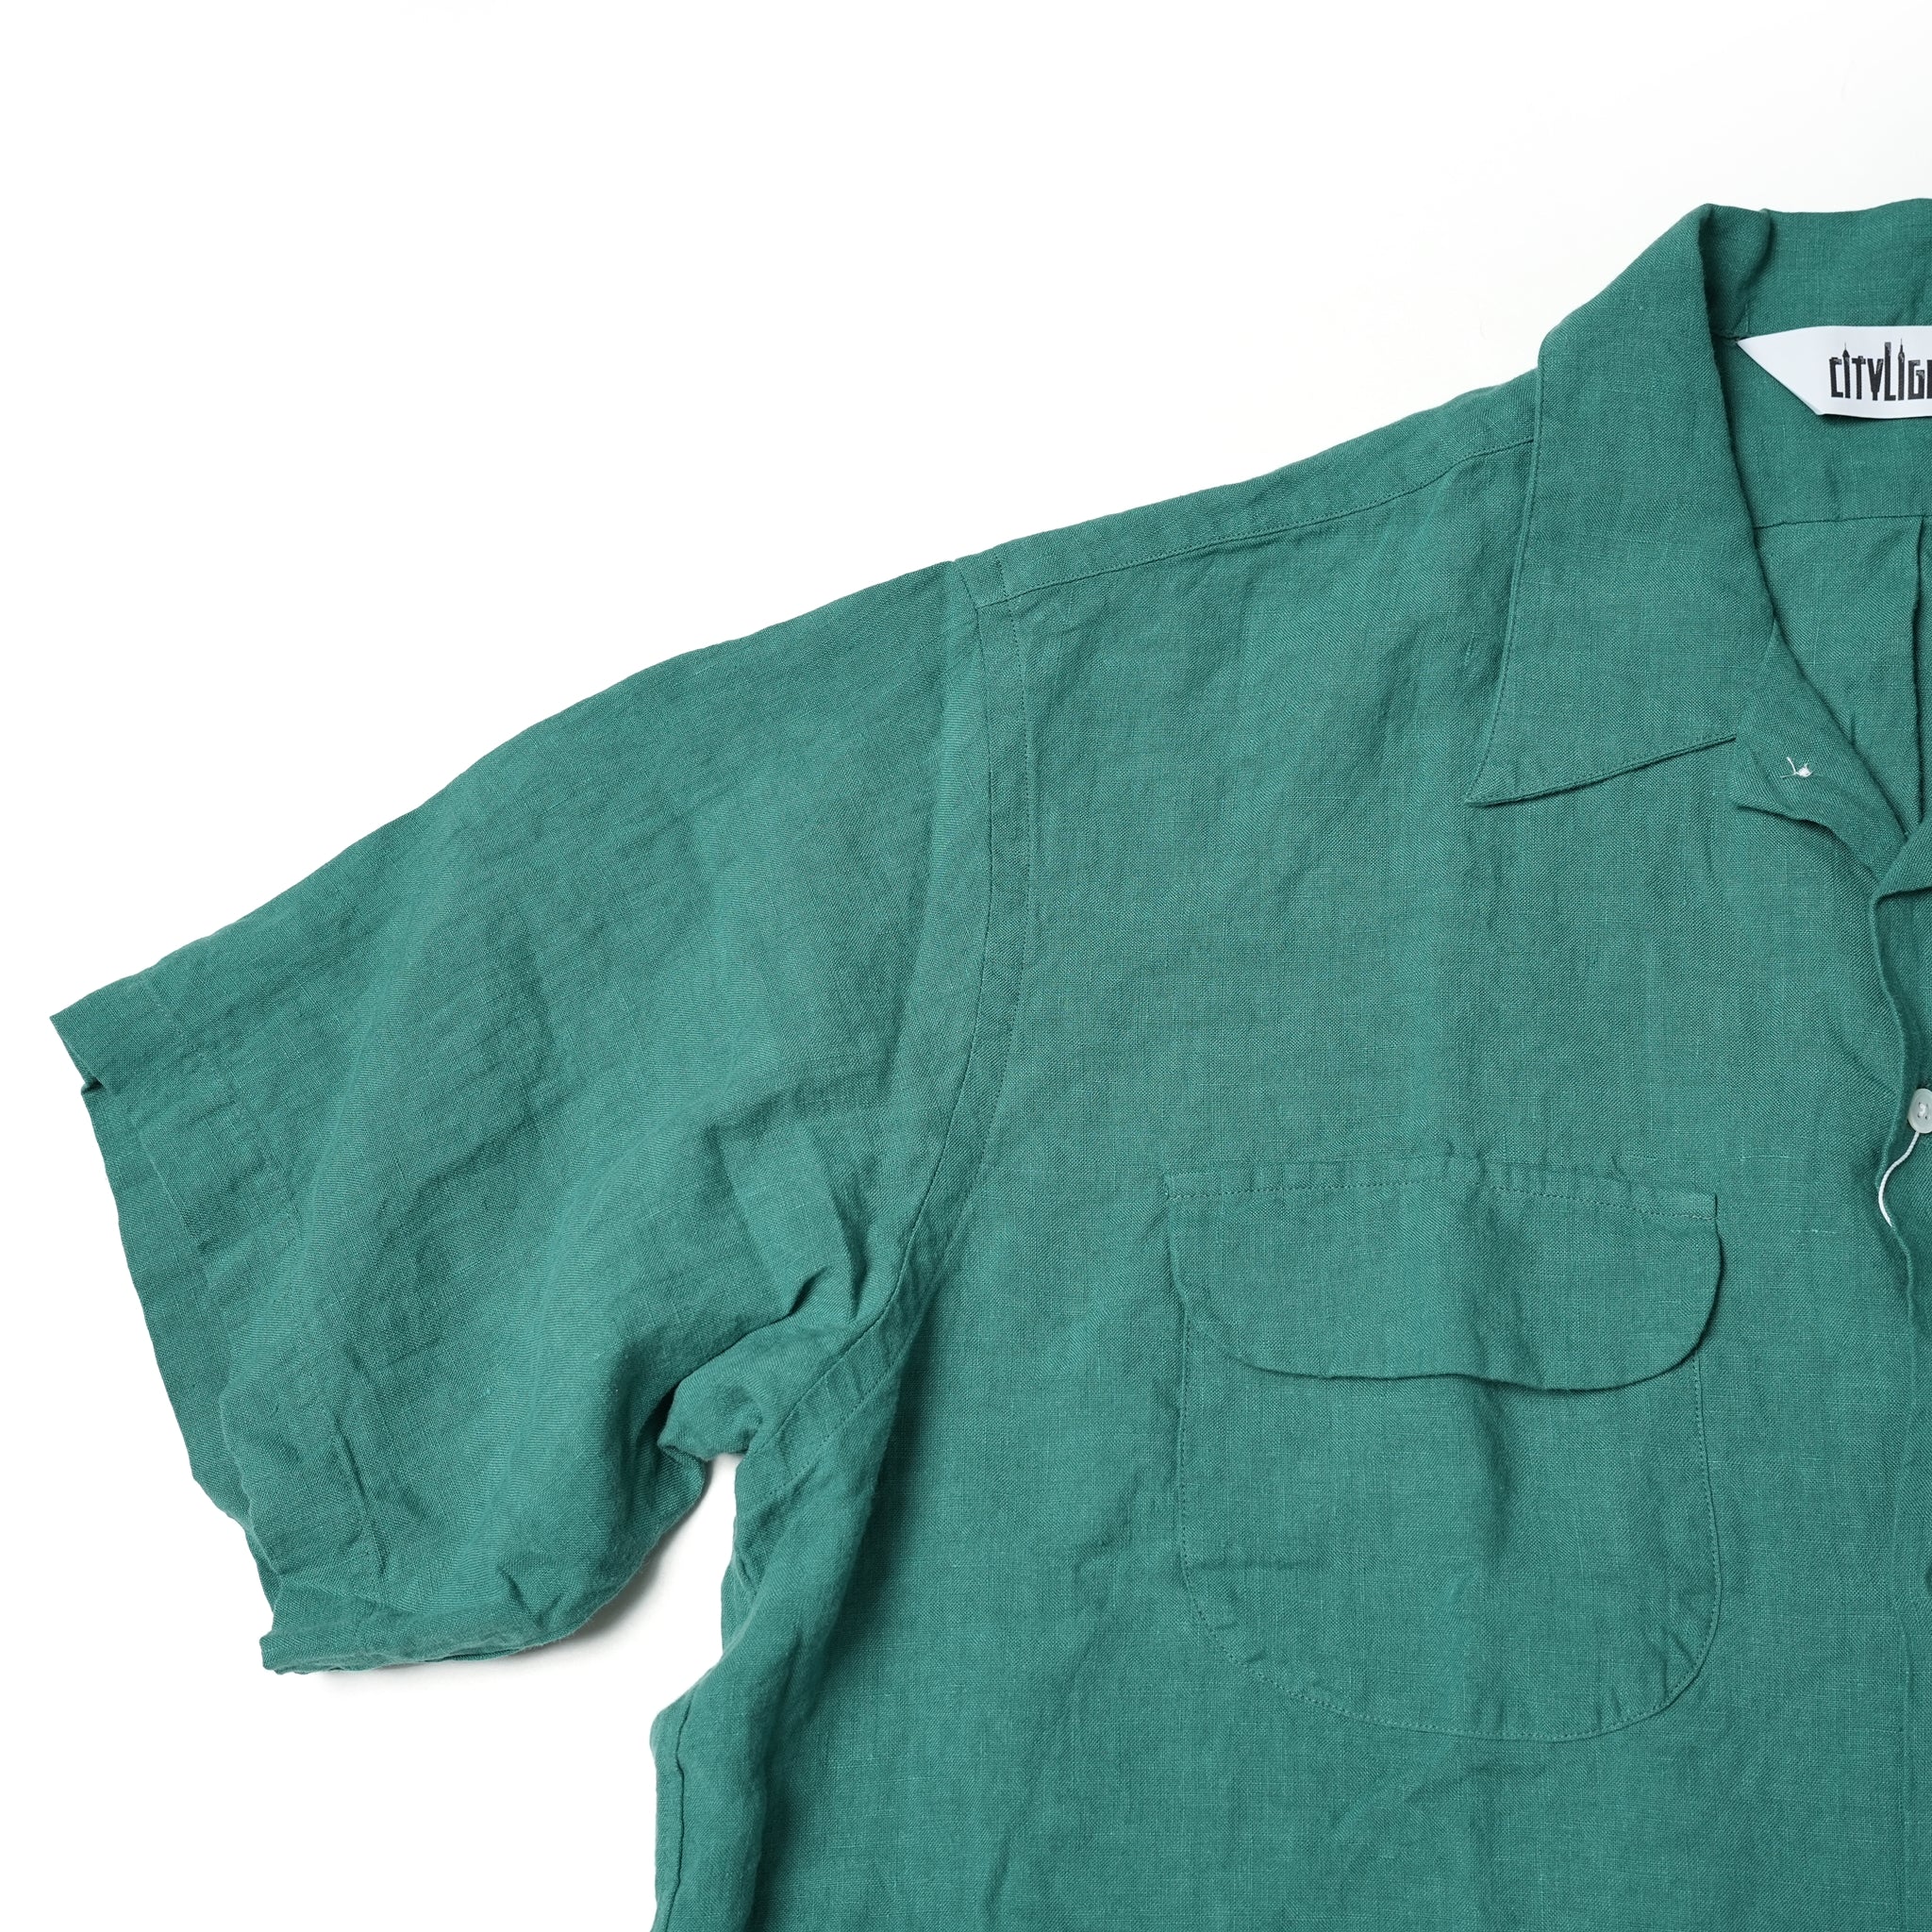 Name: FLAT COLLAR SS SHIRT *GREEN LINEN 【CITYLIGHTS PRODUCTS_シティライツプロダクツ】